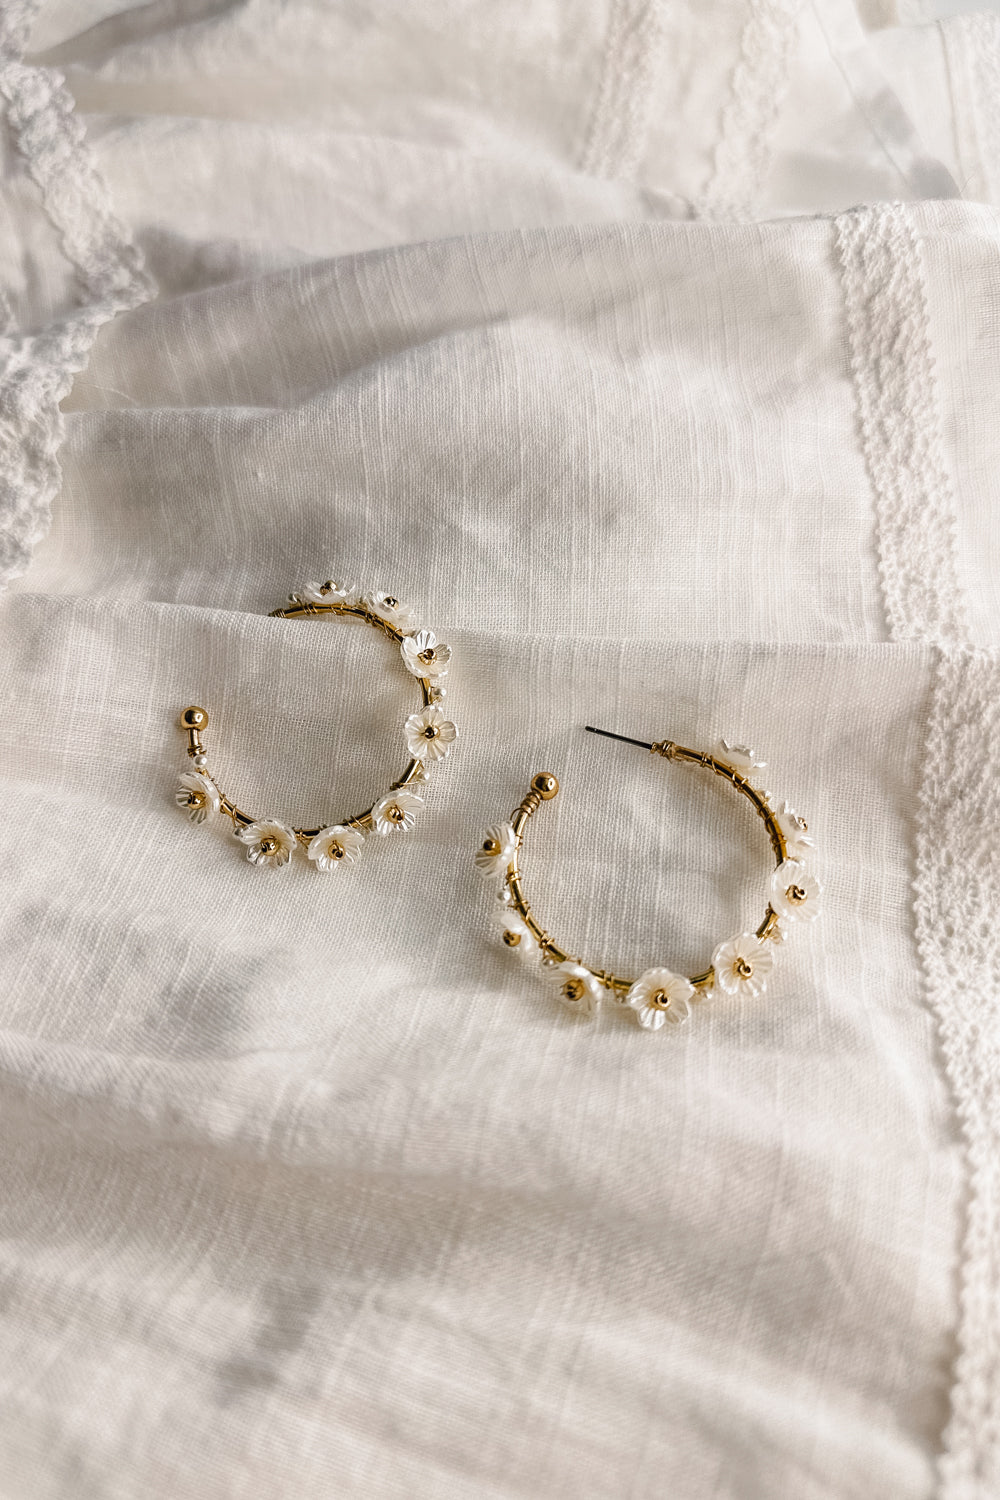 Flat lay view of the Jessie White and Gold Flower Hoop Earring which features medium size open gold hoops, white flower details and back clasp closure